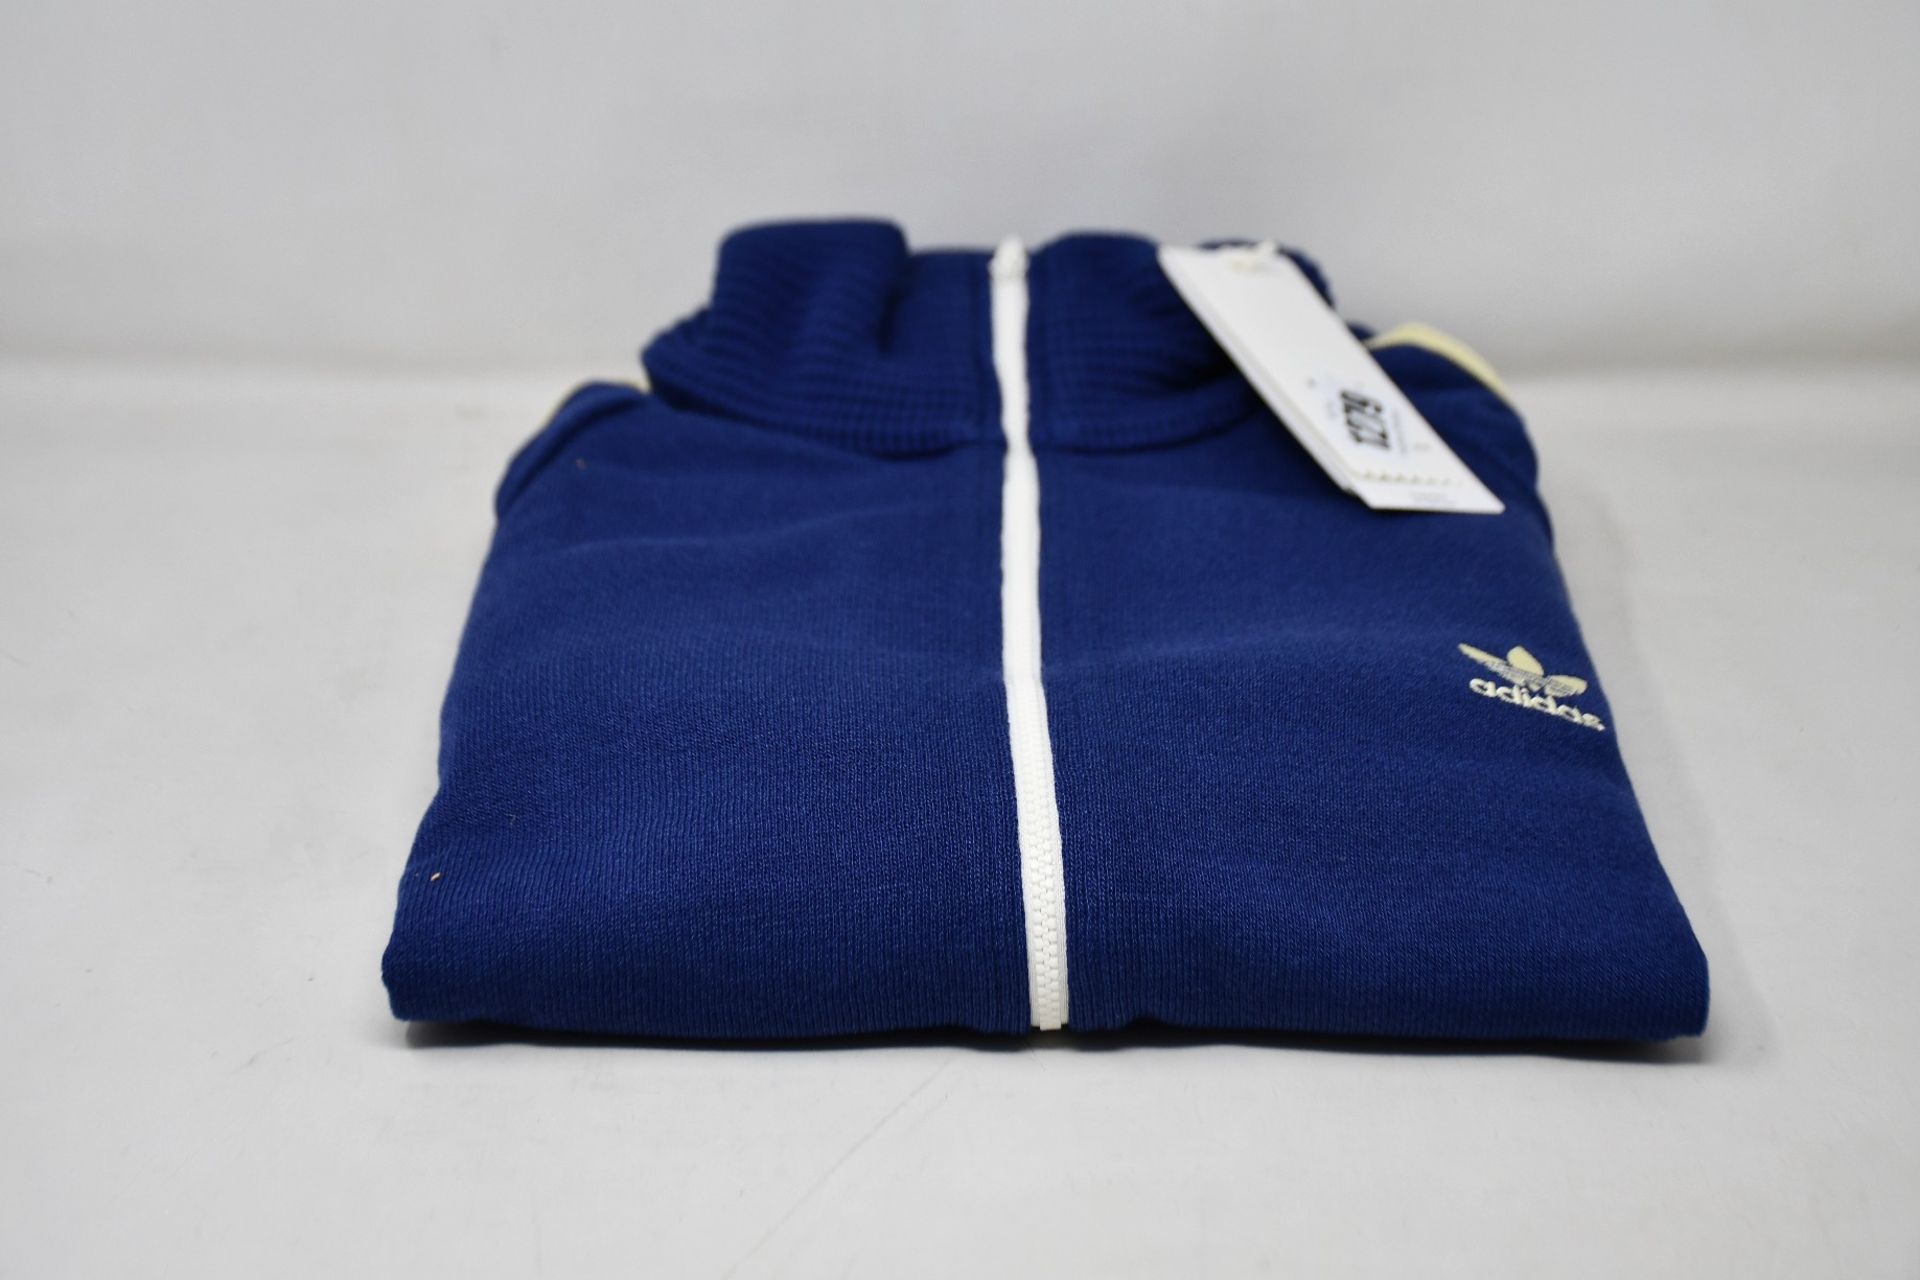 An as new Adidas x Wales Bonner 80's track top (UK M).